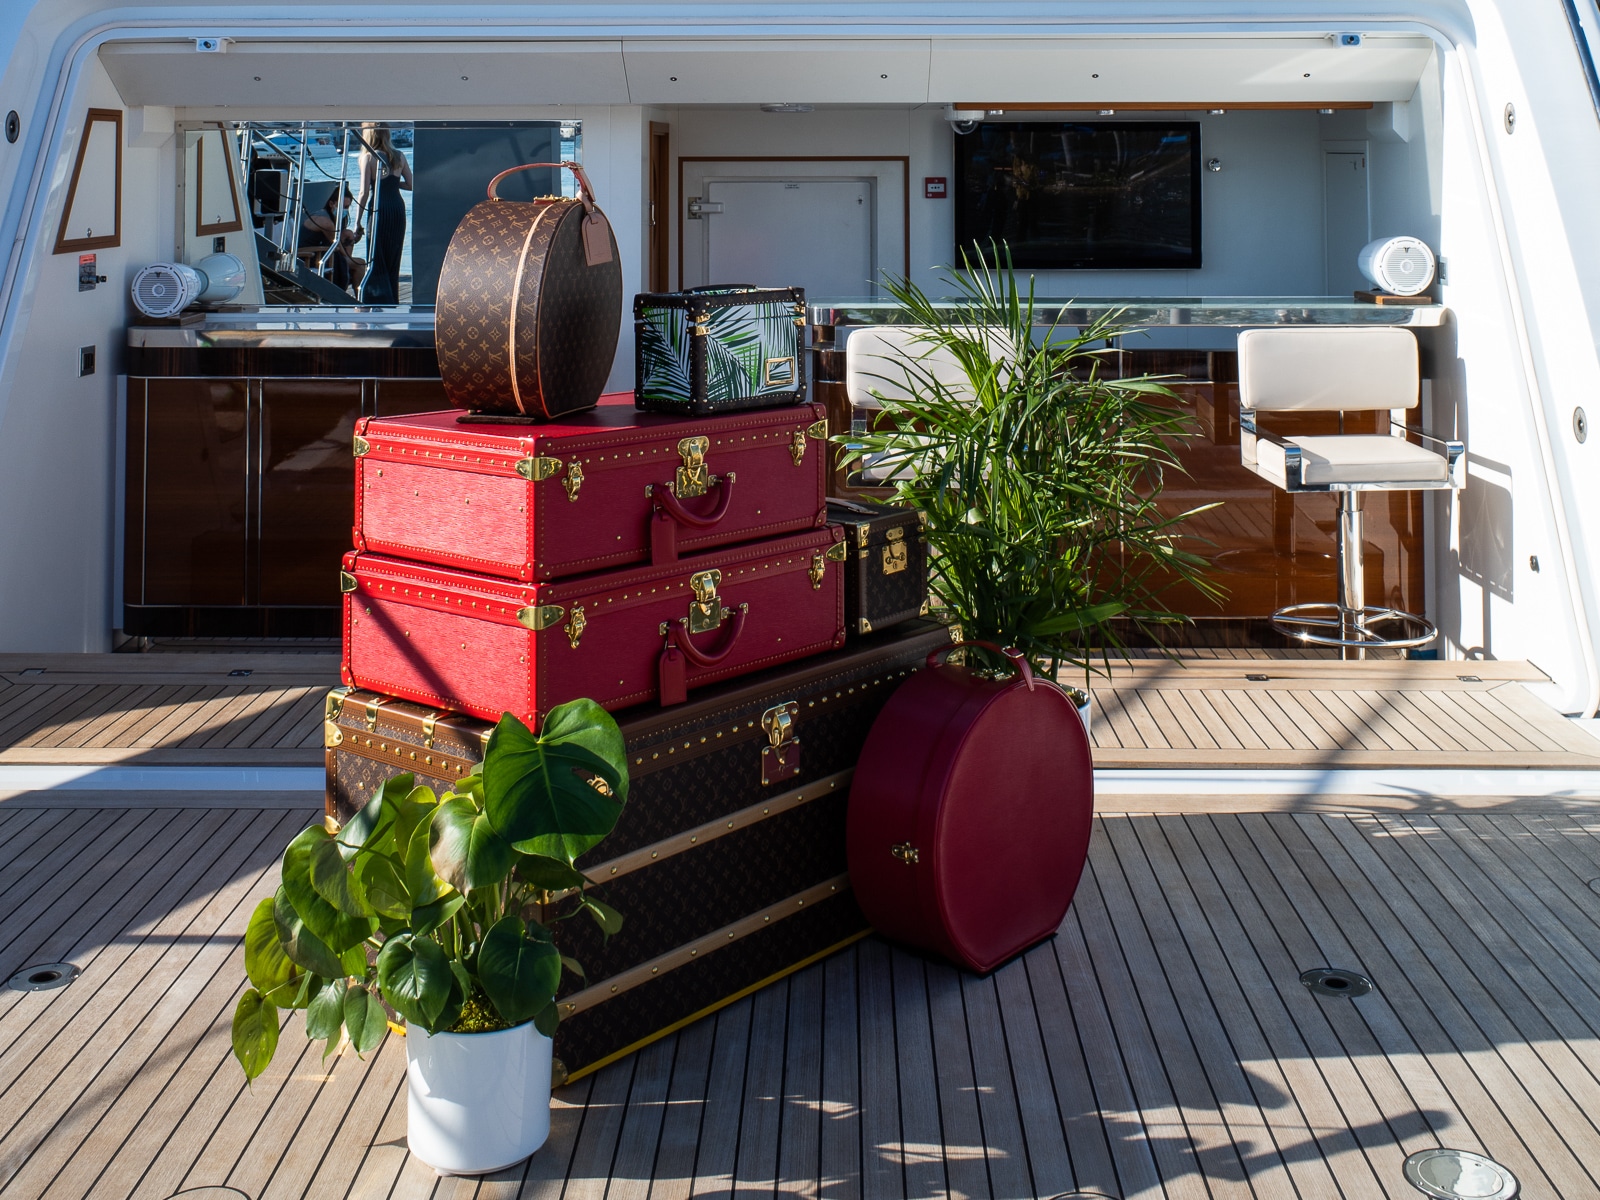 Louis Vuitton Is Showcasing Its Homewares on a Yacht in Miami – Robb Report